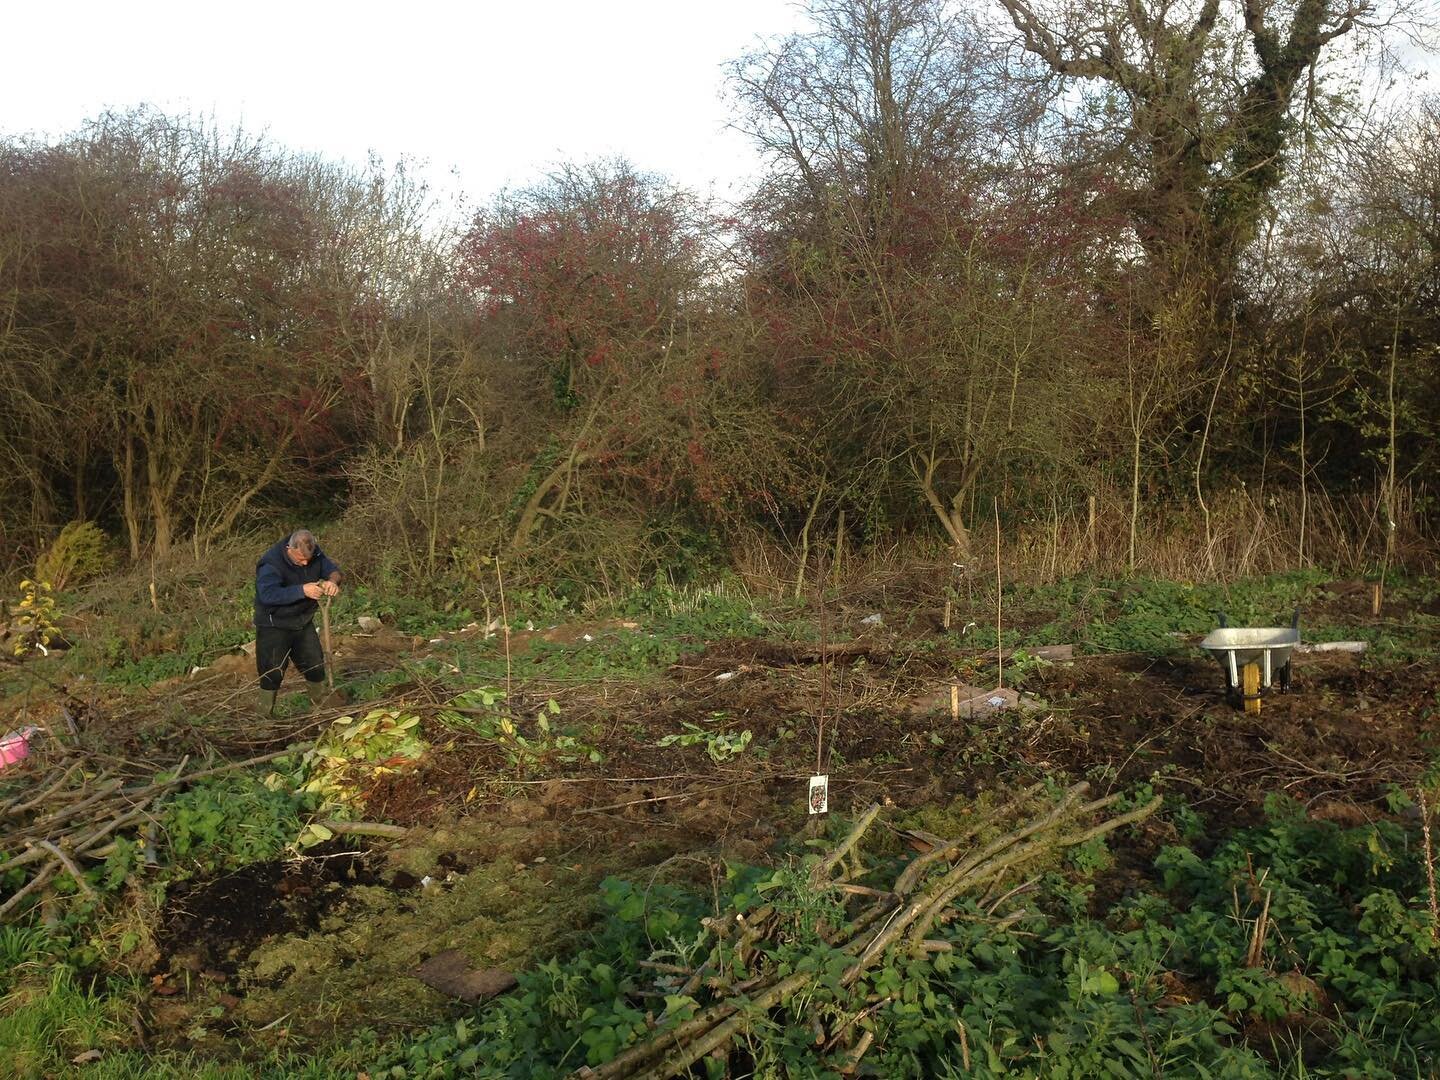 Establishing a Forest Garden. 

The first picture is from 2016 - clearing the space of scrub. The rest are from today with the trees already well established and good harvests already available with a buzzing, bio diverse environment.

Visible in the